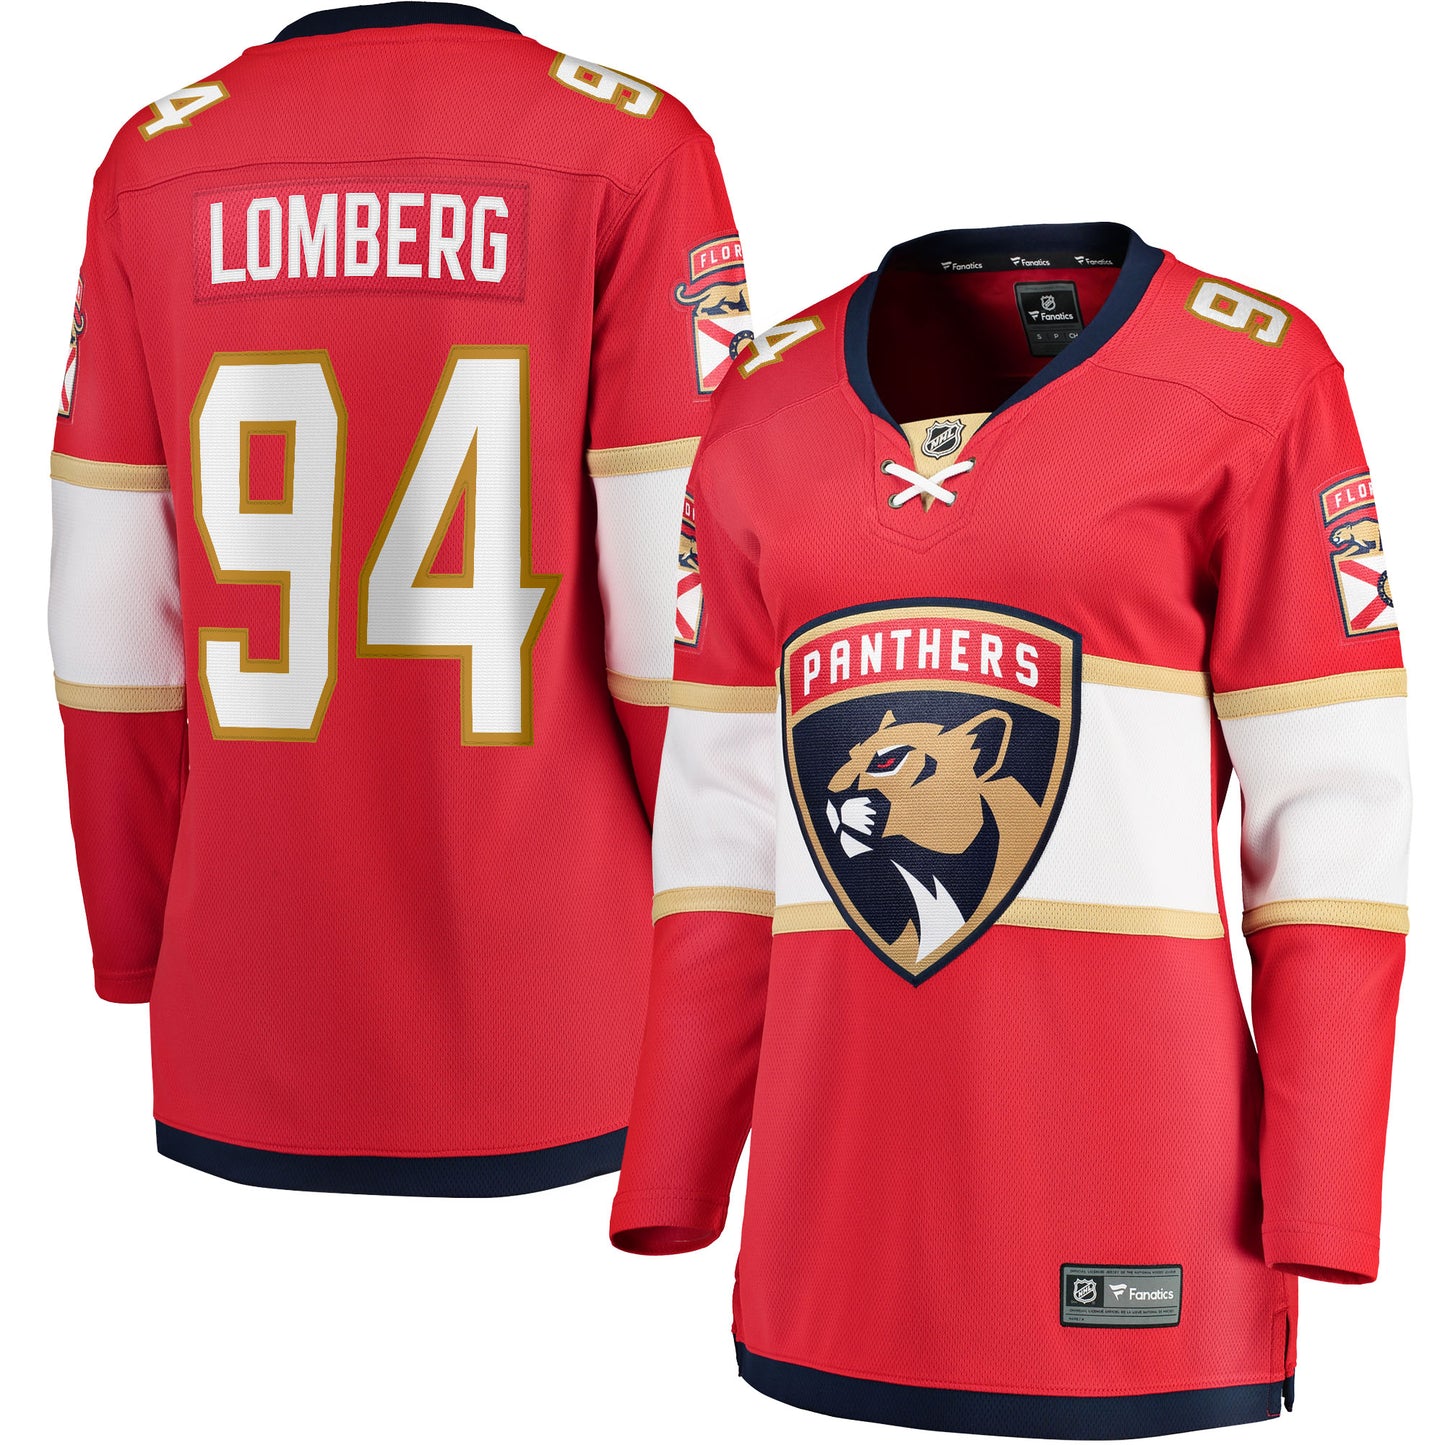 Ryan Lomberg Florida Panthers Fanatics Branded Women's Home Breakaway Player Jersey - Red